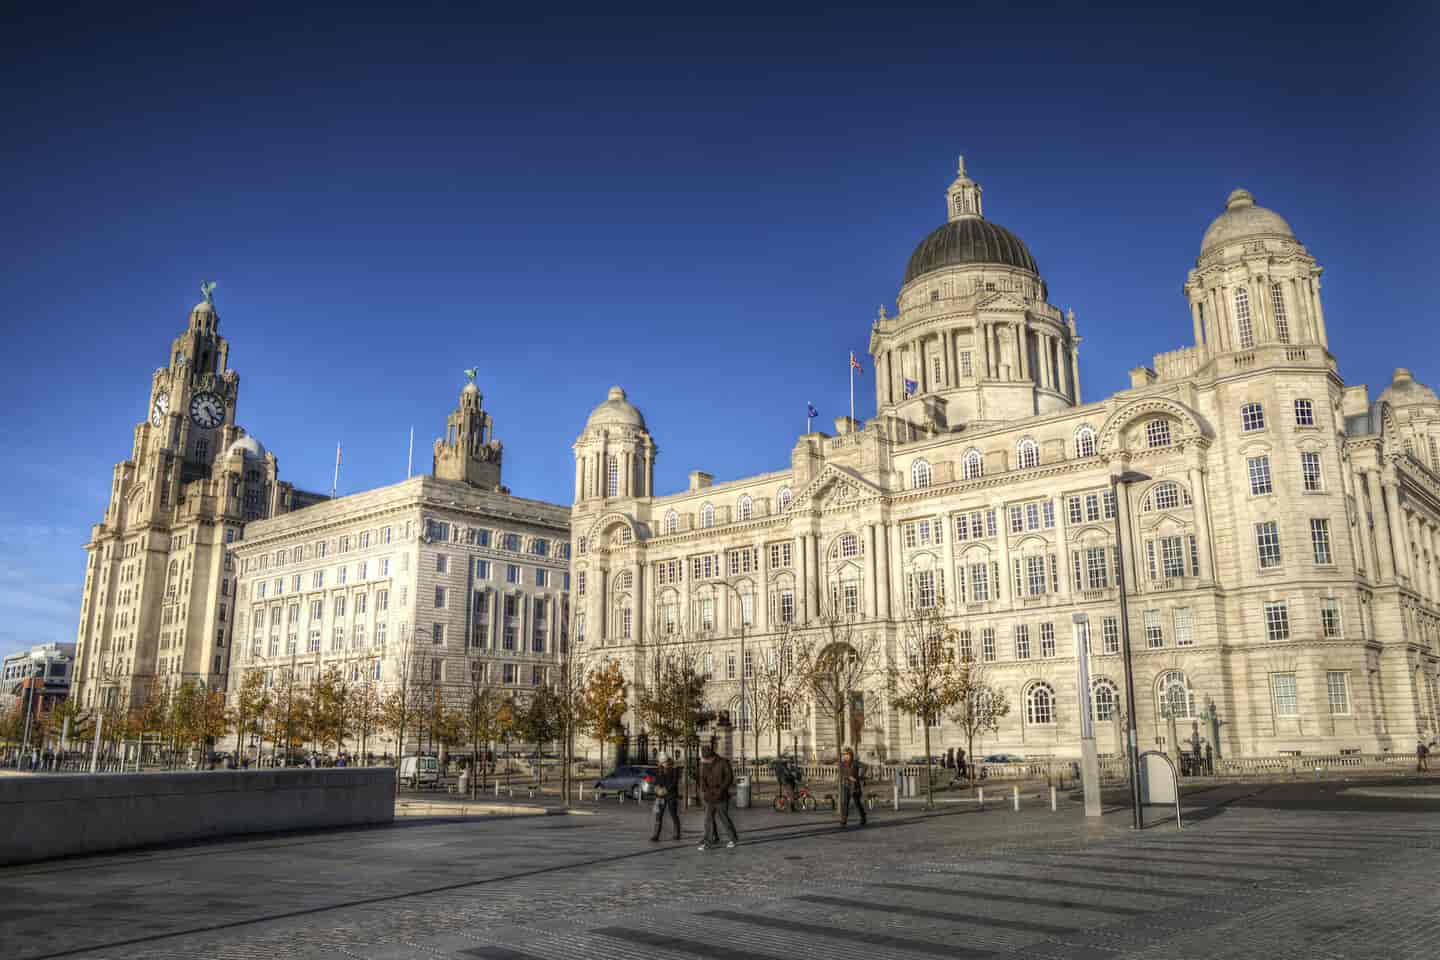 Student Accommodation in Liverpool - A view of the Port of Liverpool building and The Three Graces